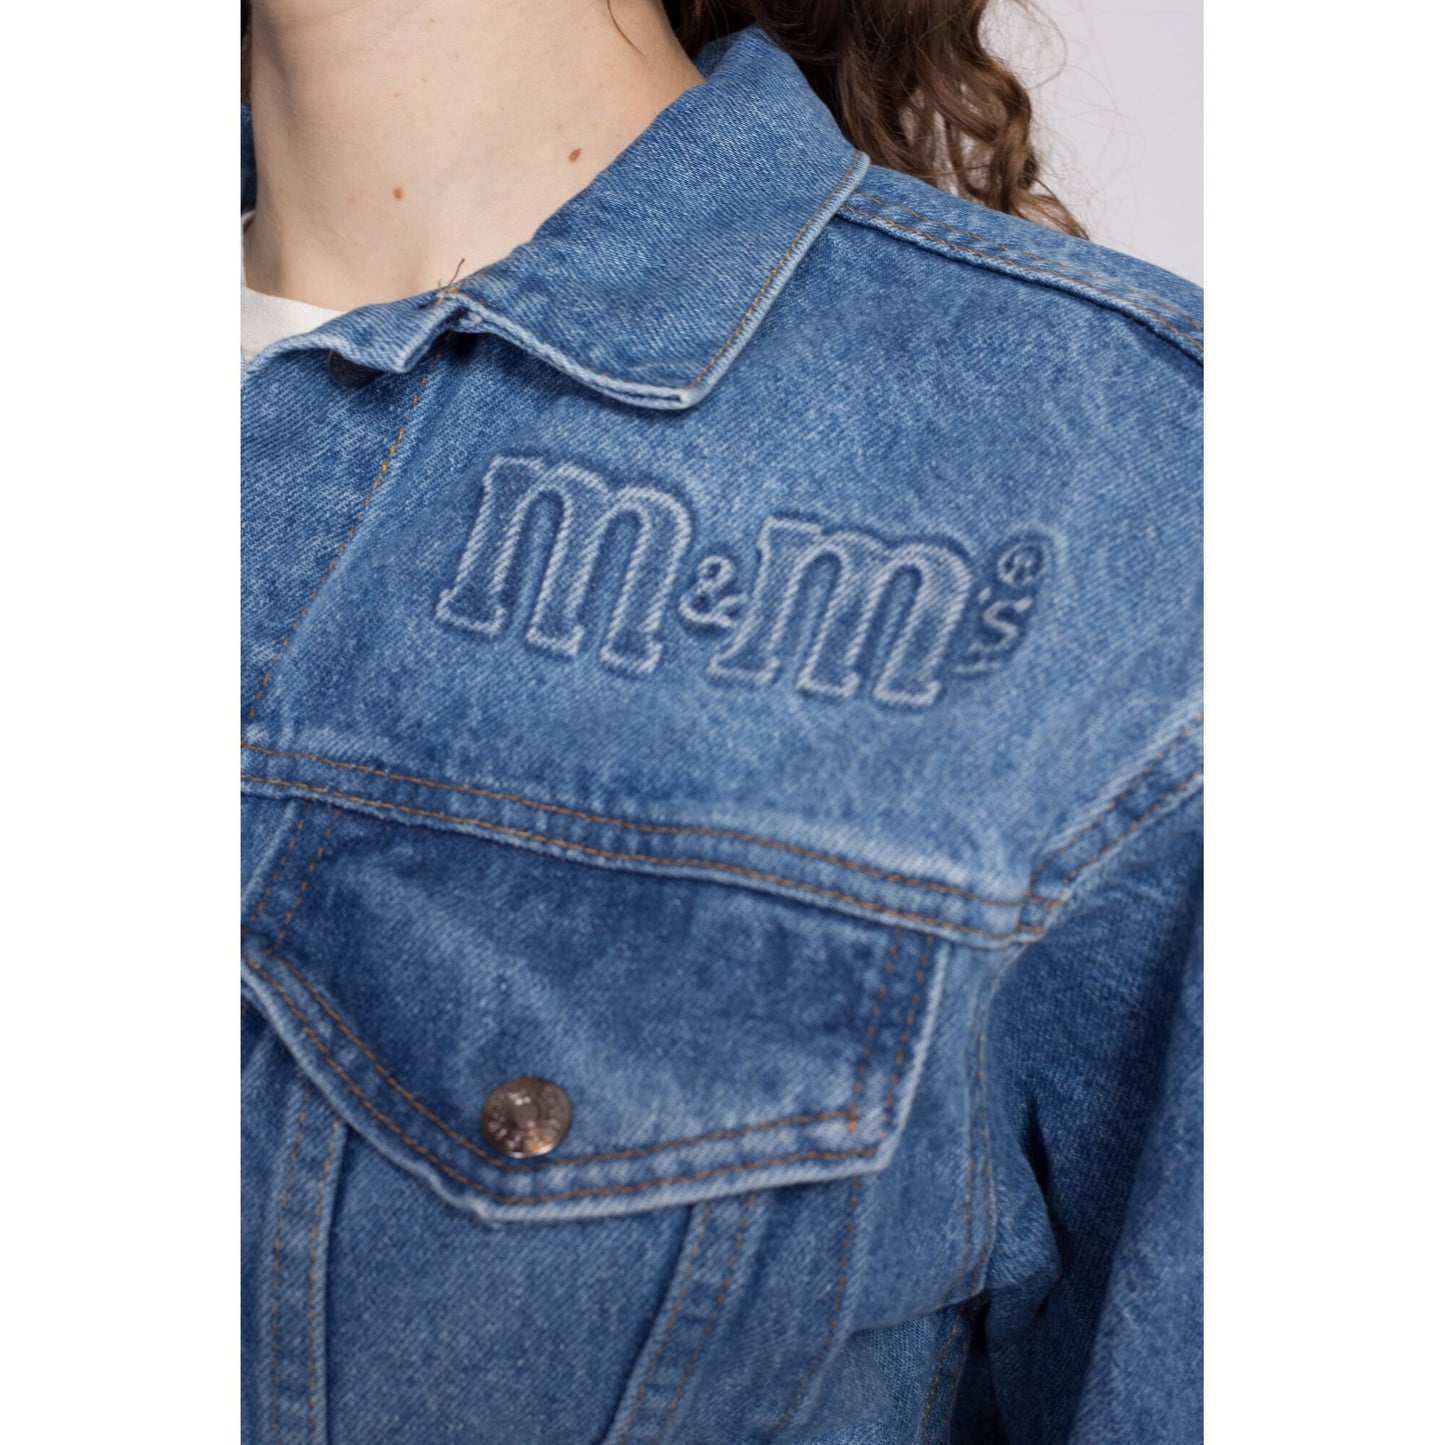 90s M&Ms Embossed Denim Jacket - Petite Small to Medium | Vintage Candy Brand Logo Coin Toss Graphic Medium Wash Jean Jacket